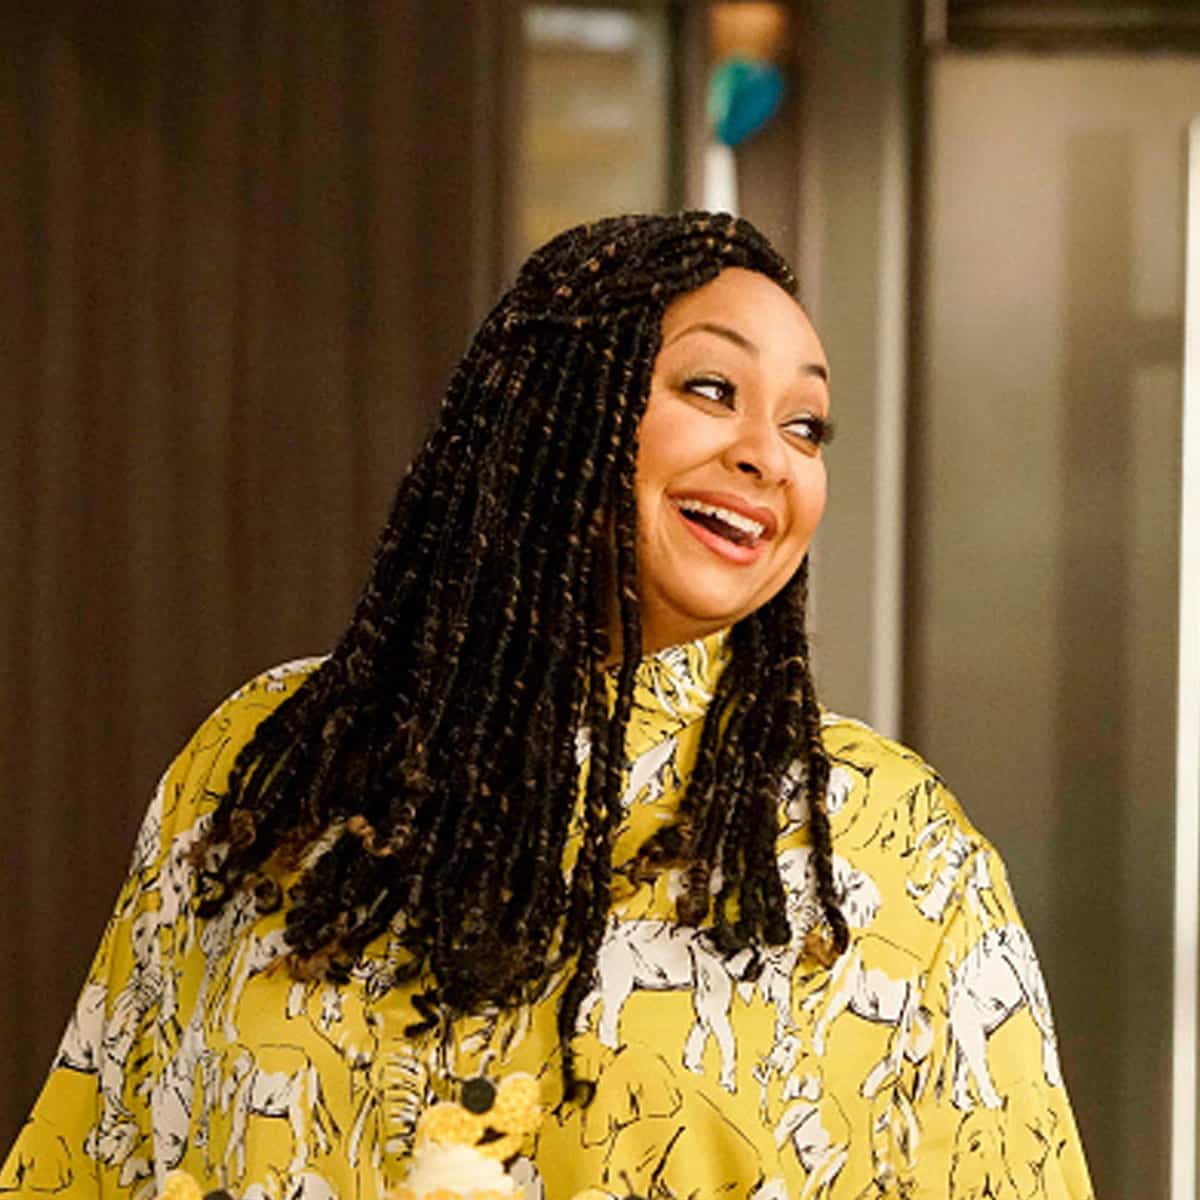 Top Rated 20+ What is Raven-Symone Net Worth $400 Million 2022: Full Guide